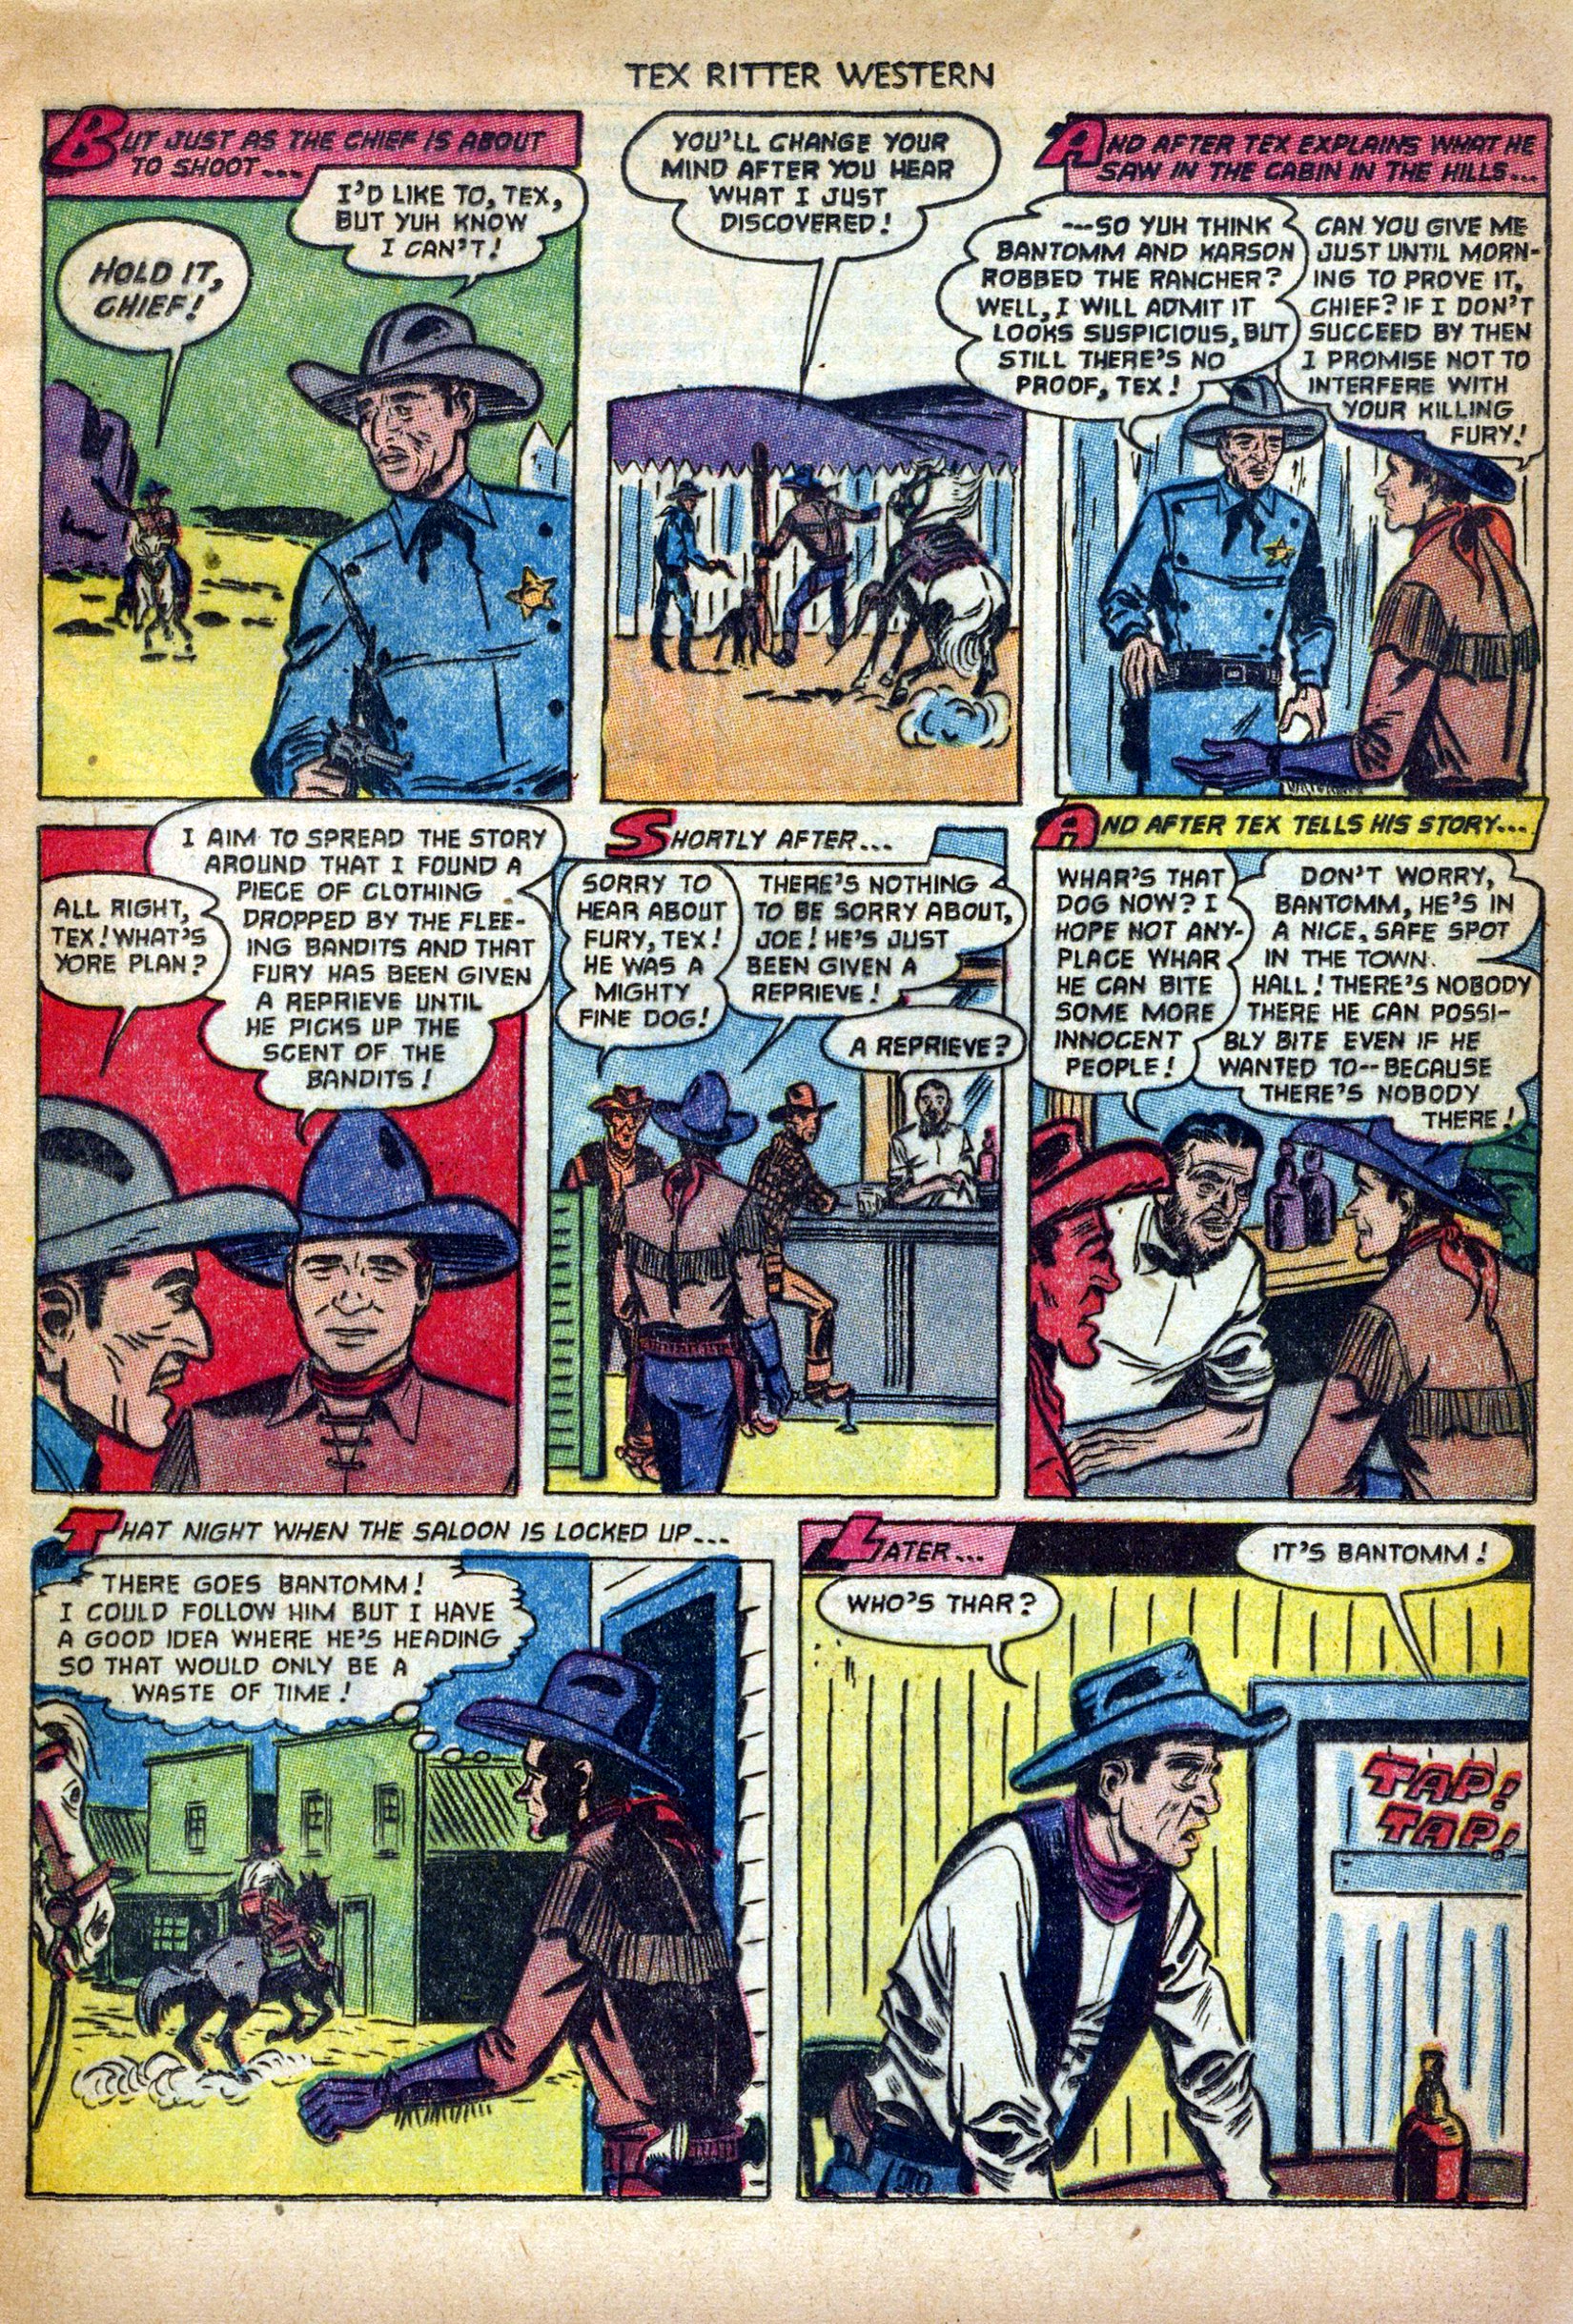 Read online Tex Ritter Western comic -  Issue #14 - 9